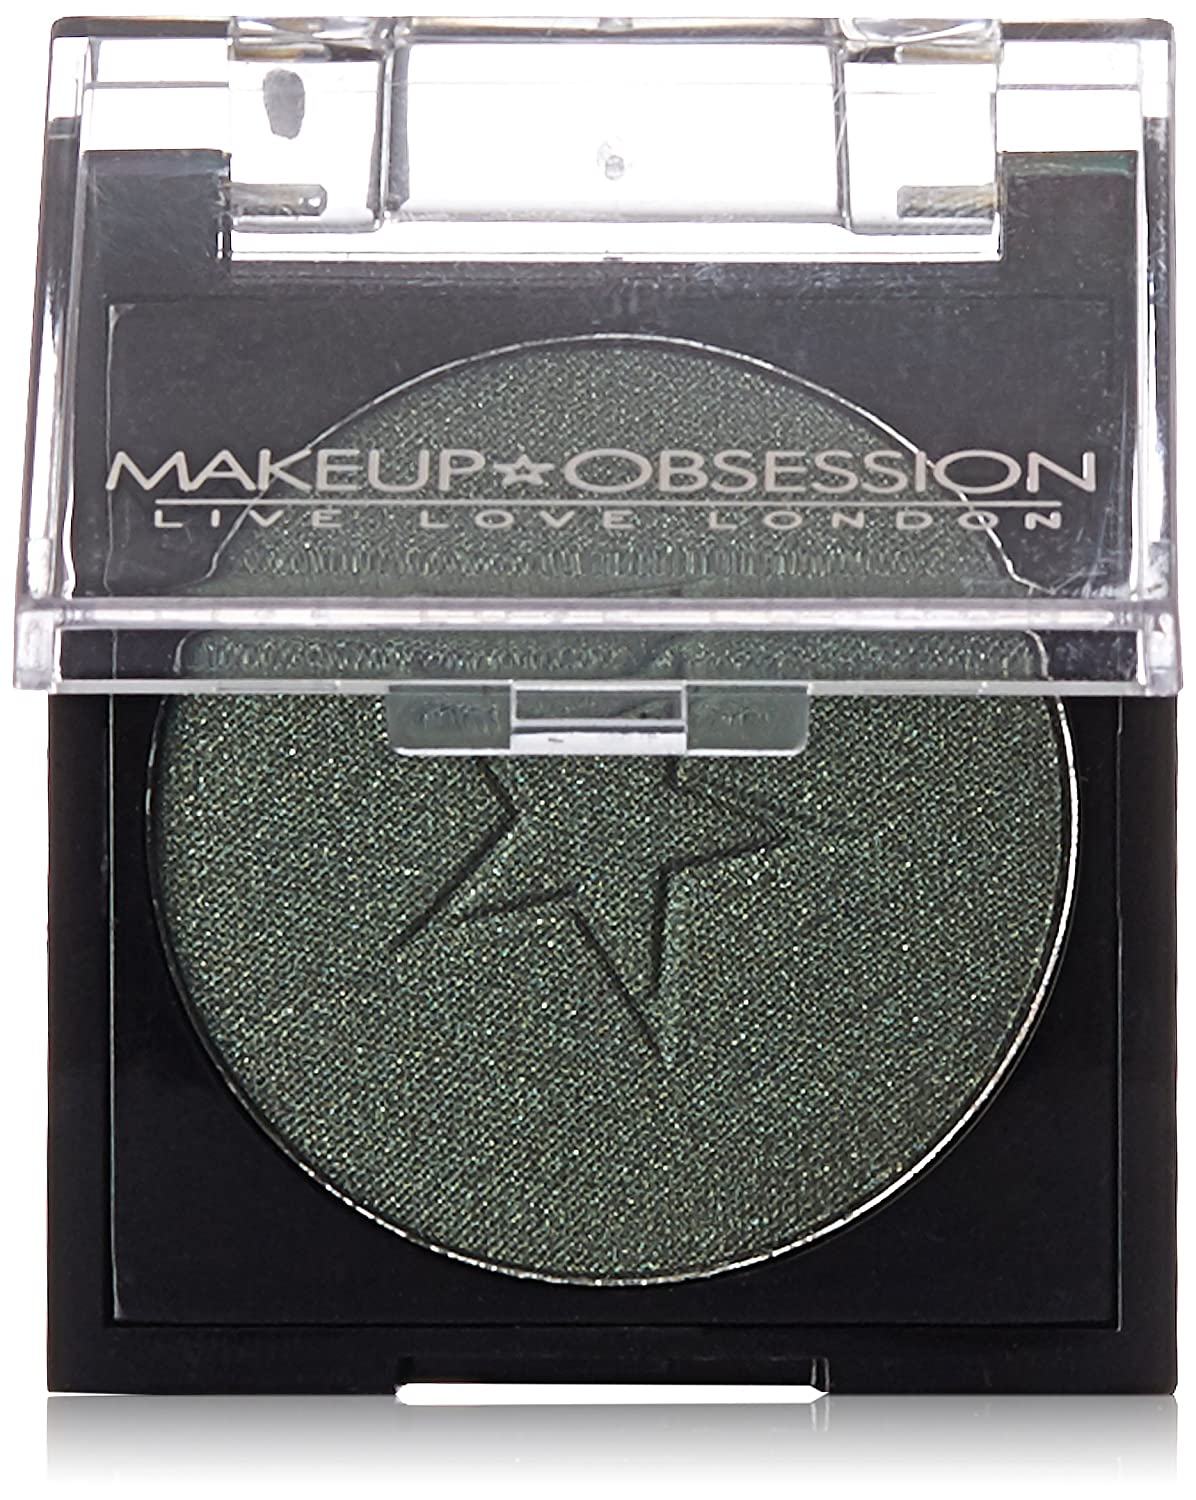 Makeup Obsession Eyeshadow E133 Emerald Fizz